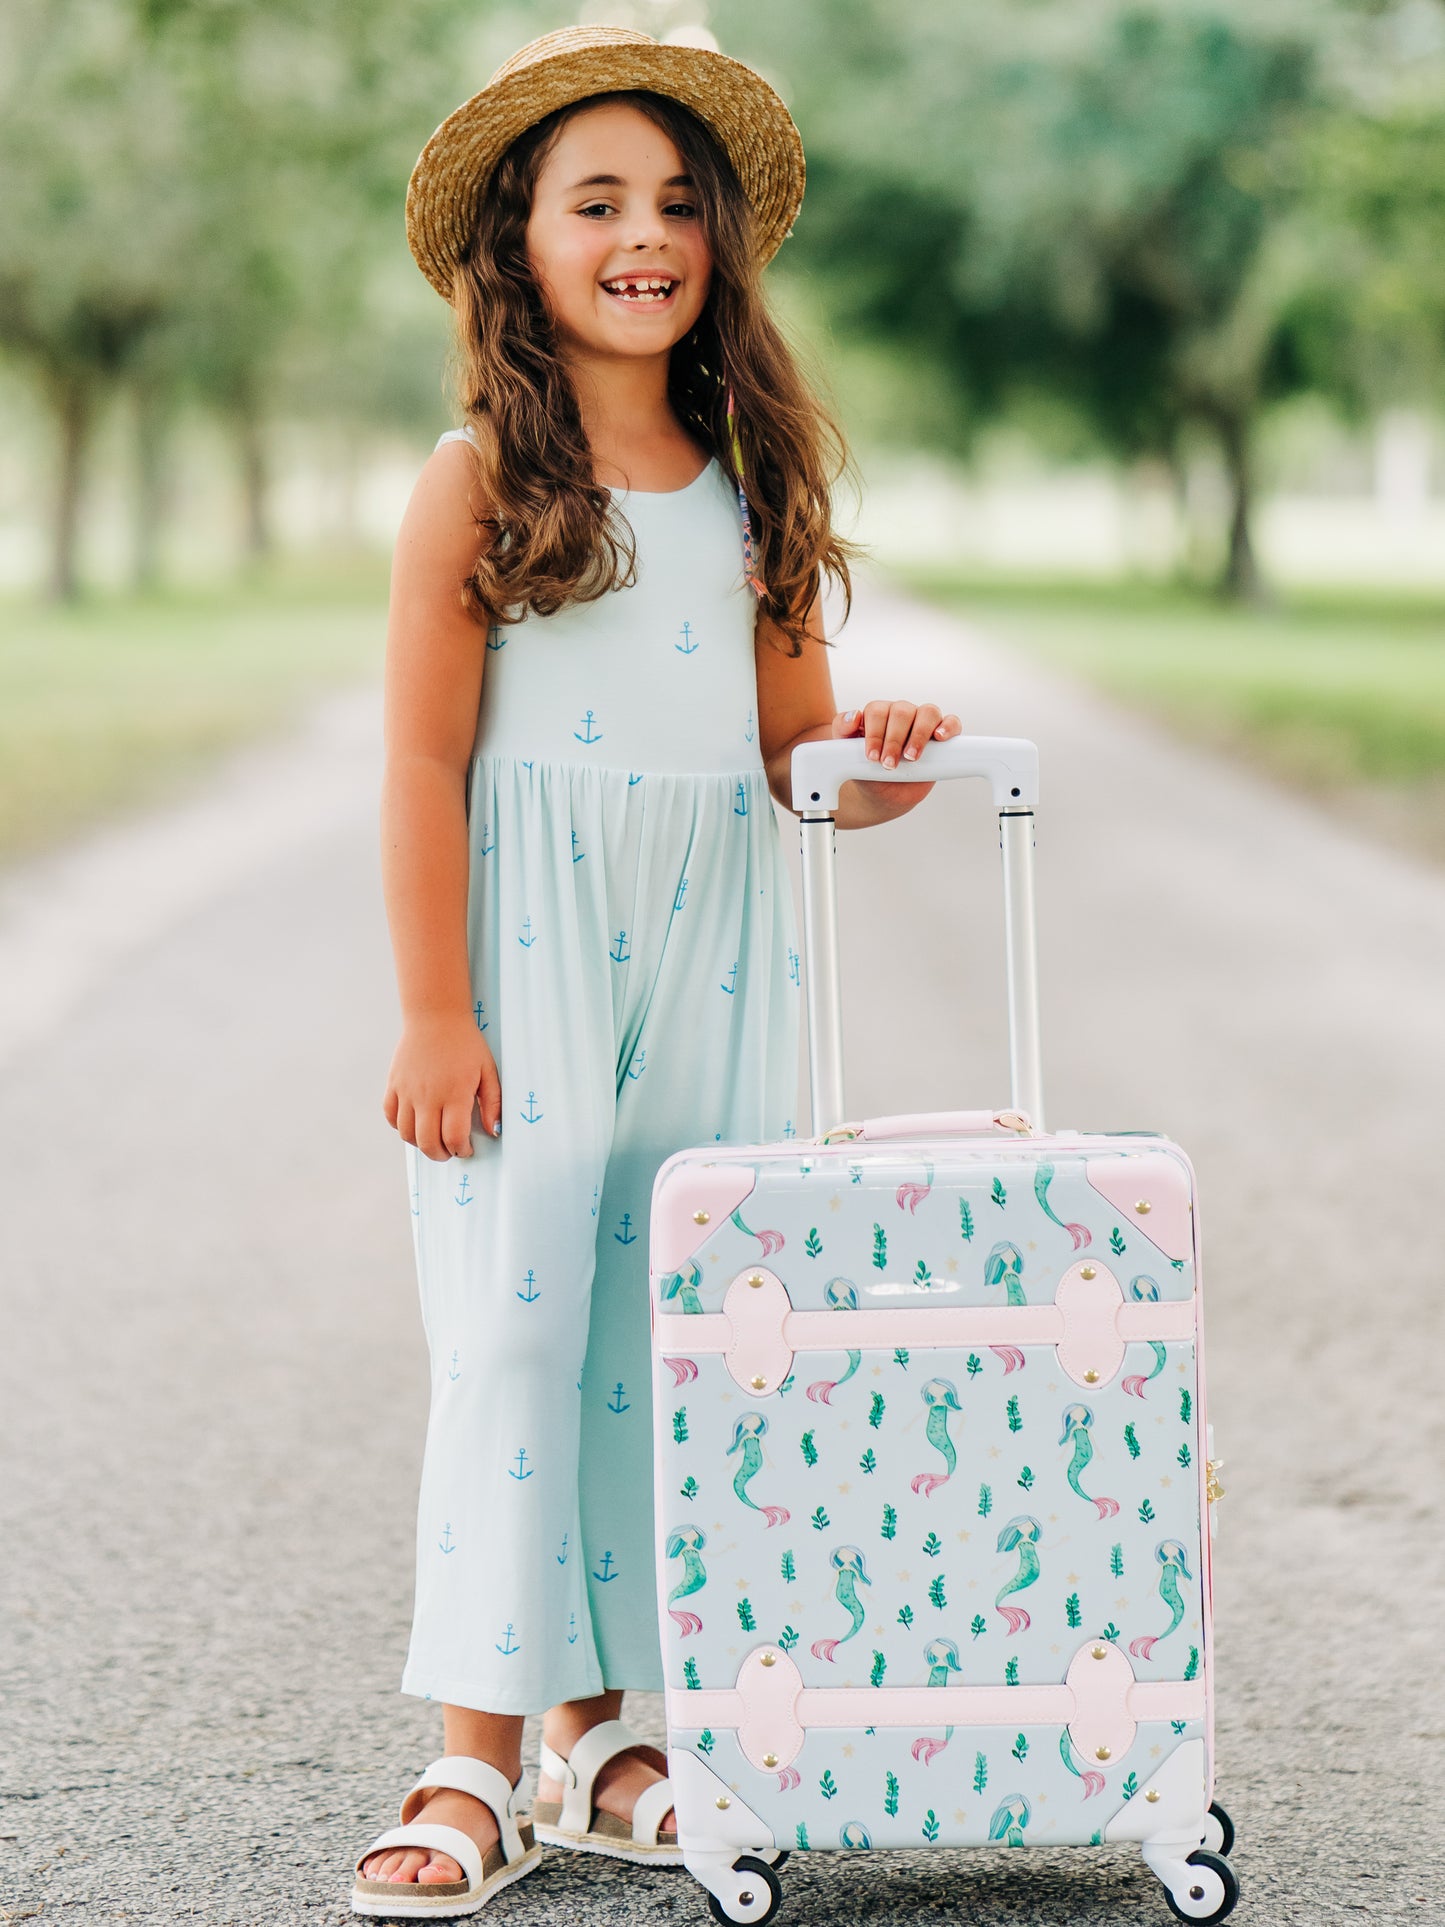 This image of a girl features the product Lennon Traveling Luggage – Sea Princess. The outside of this luggage is a pattern of mermaids and little green sea plants on a pale blue background. The inside lining is a pattern of pale blue starfish like stars on a blue background.